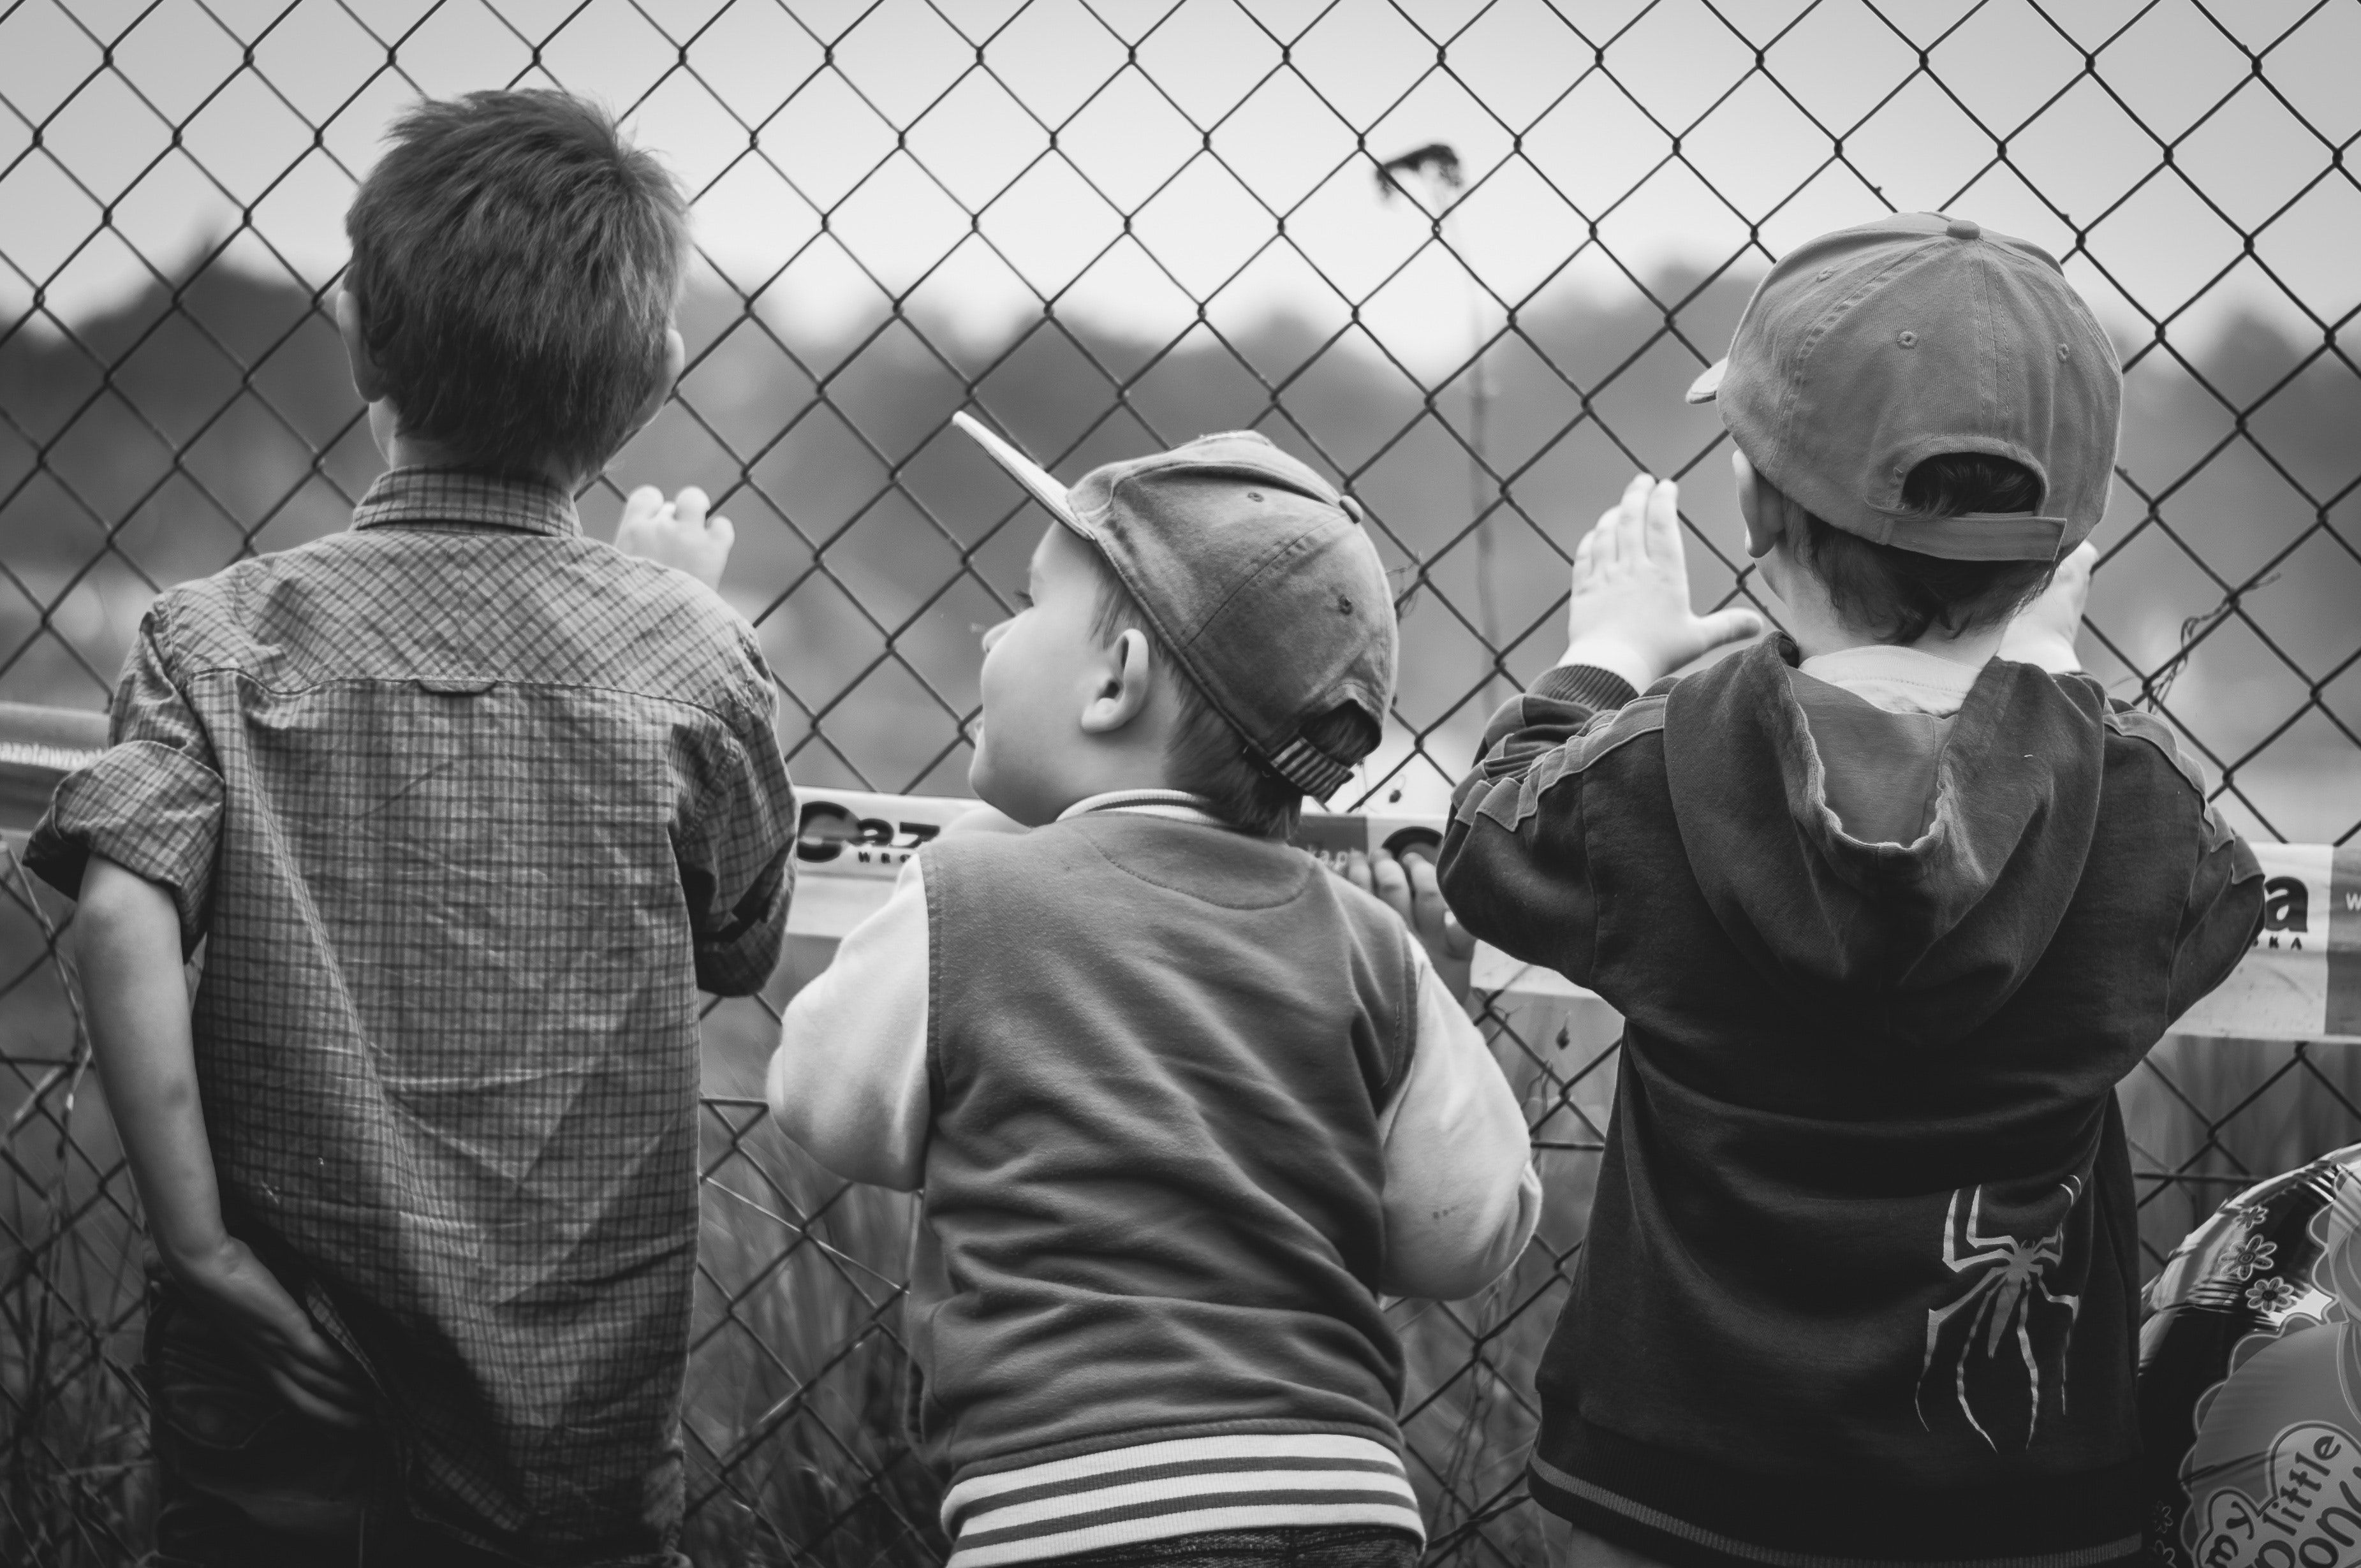 Grayscale Photography of Three Boys Facing Towards Fence · Free